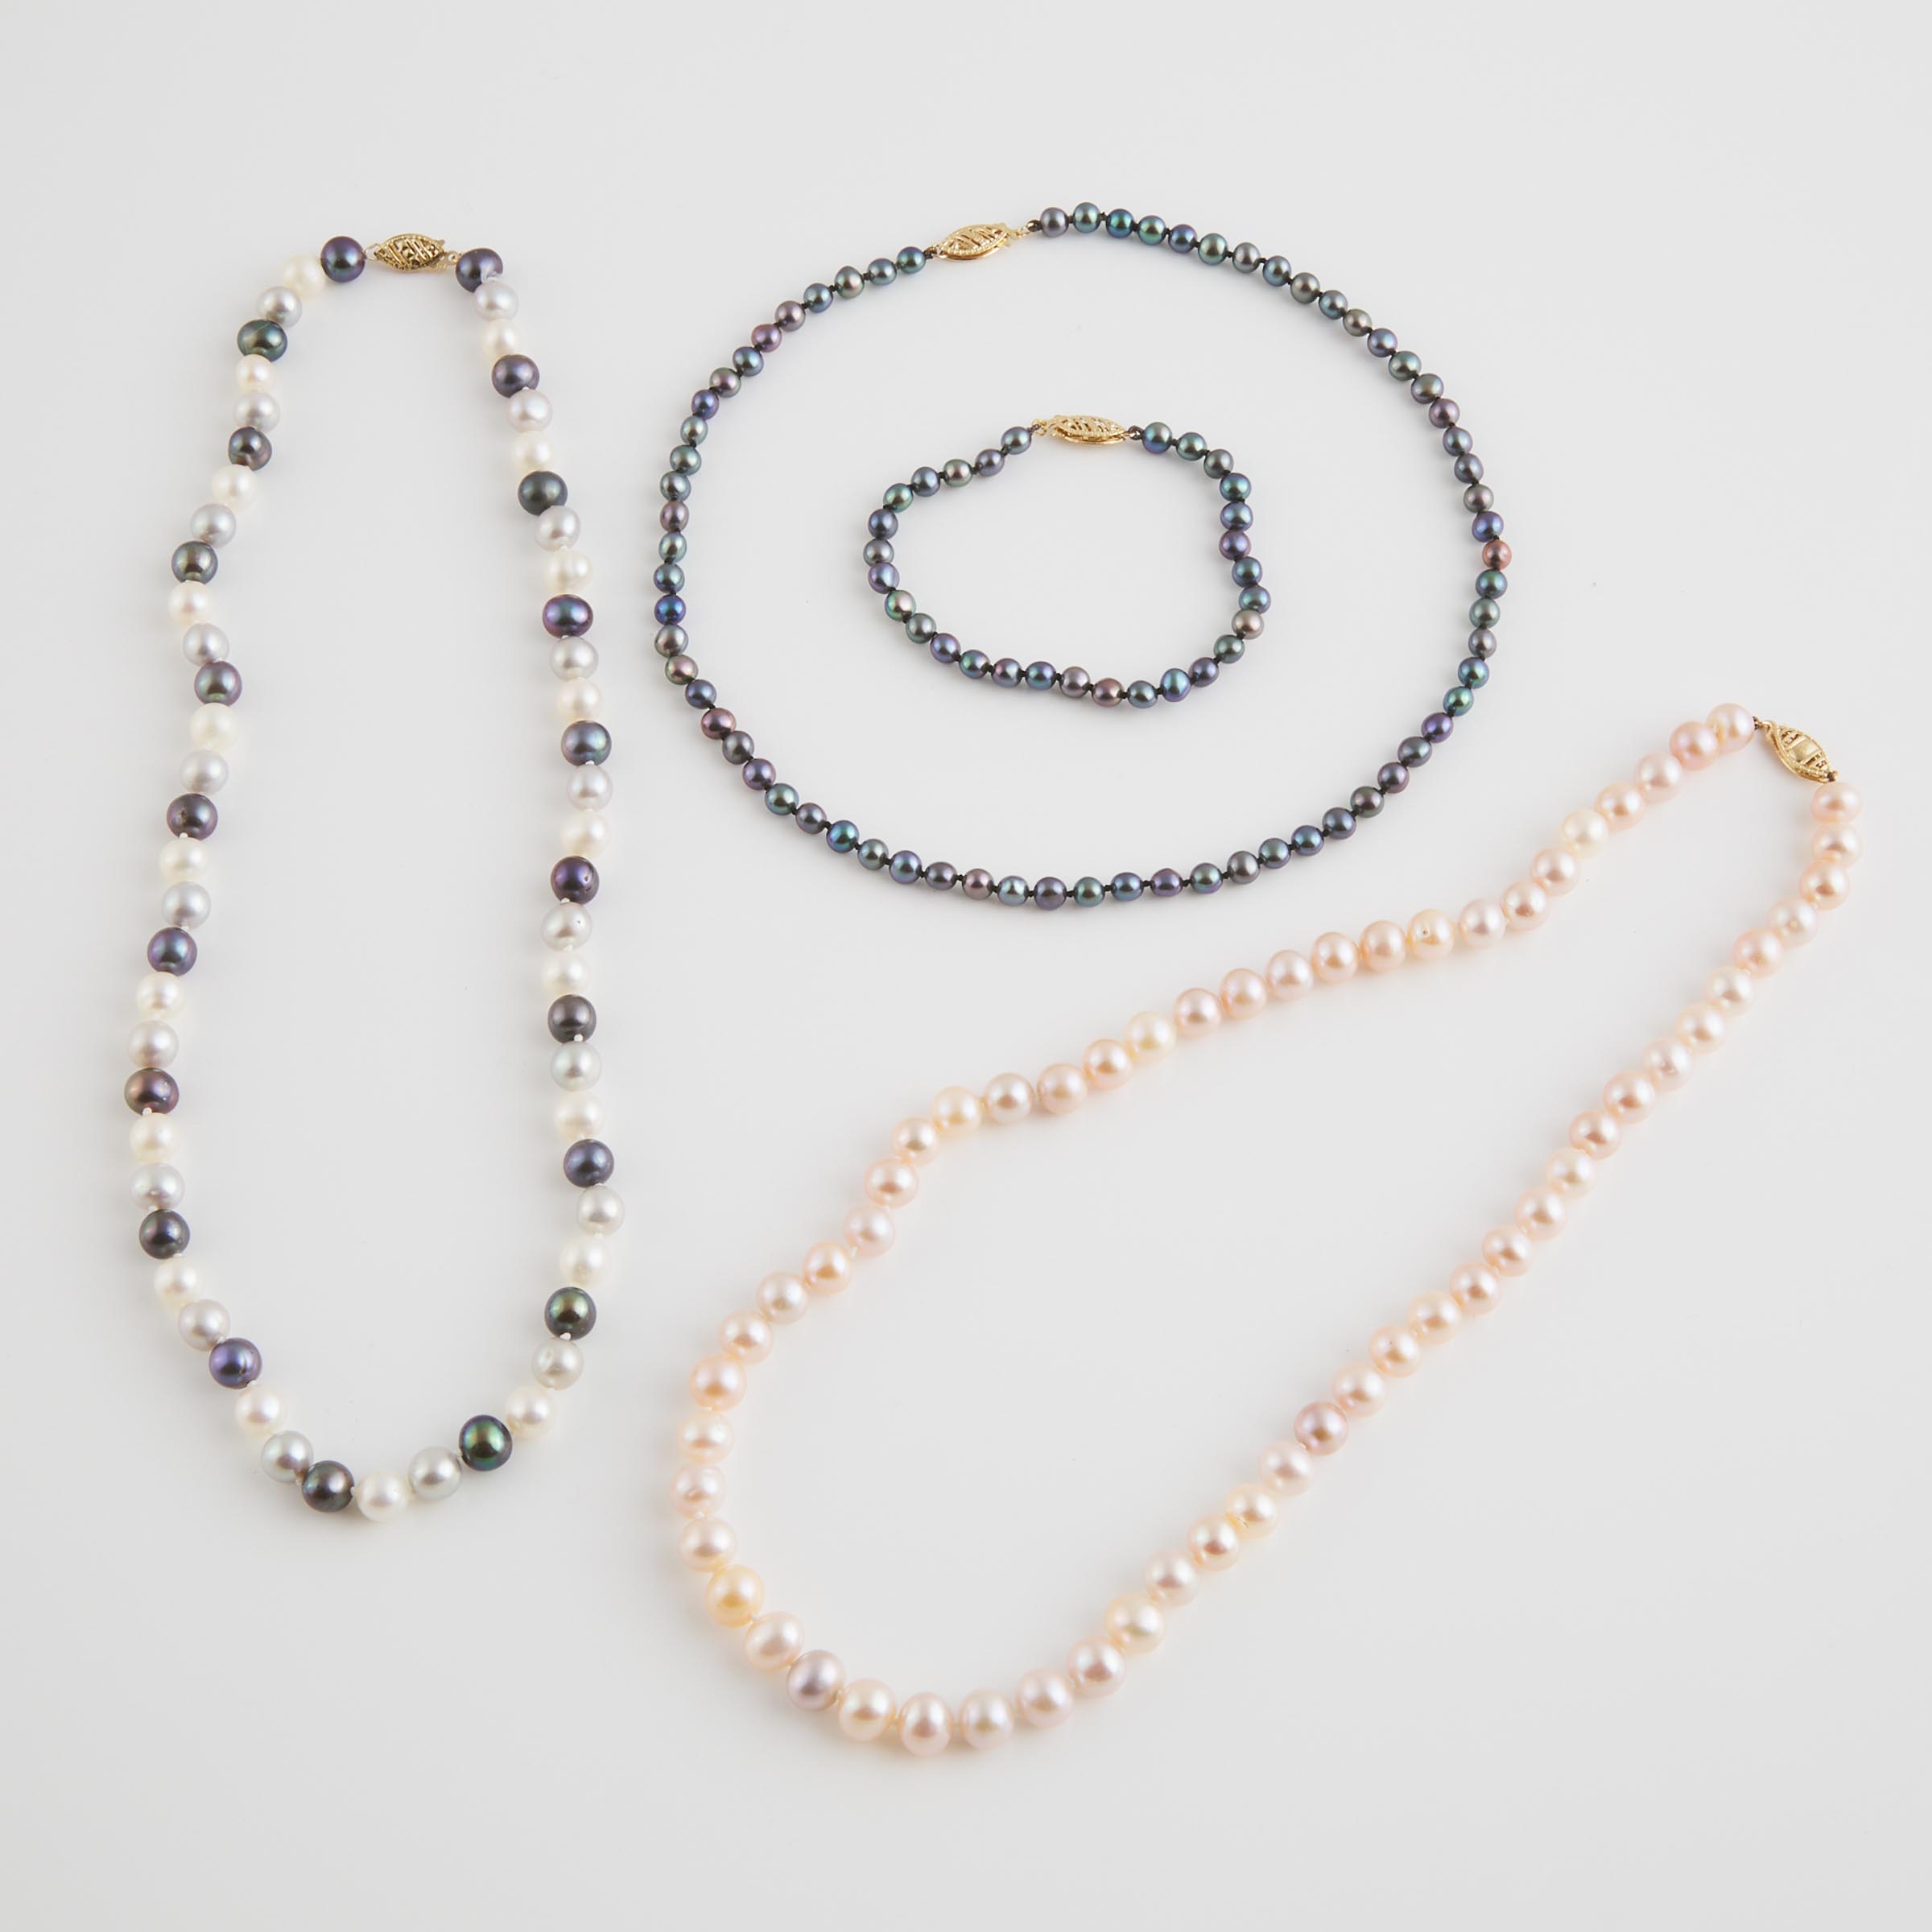 4 Single Strands Of Various Cultured Pearls